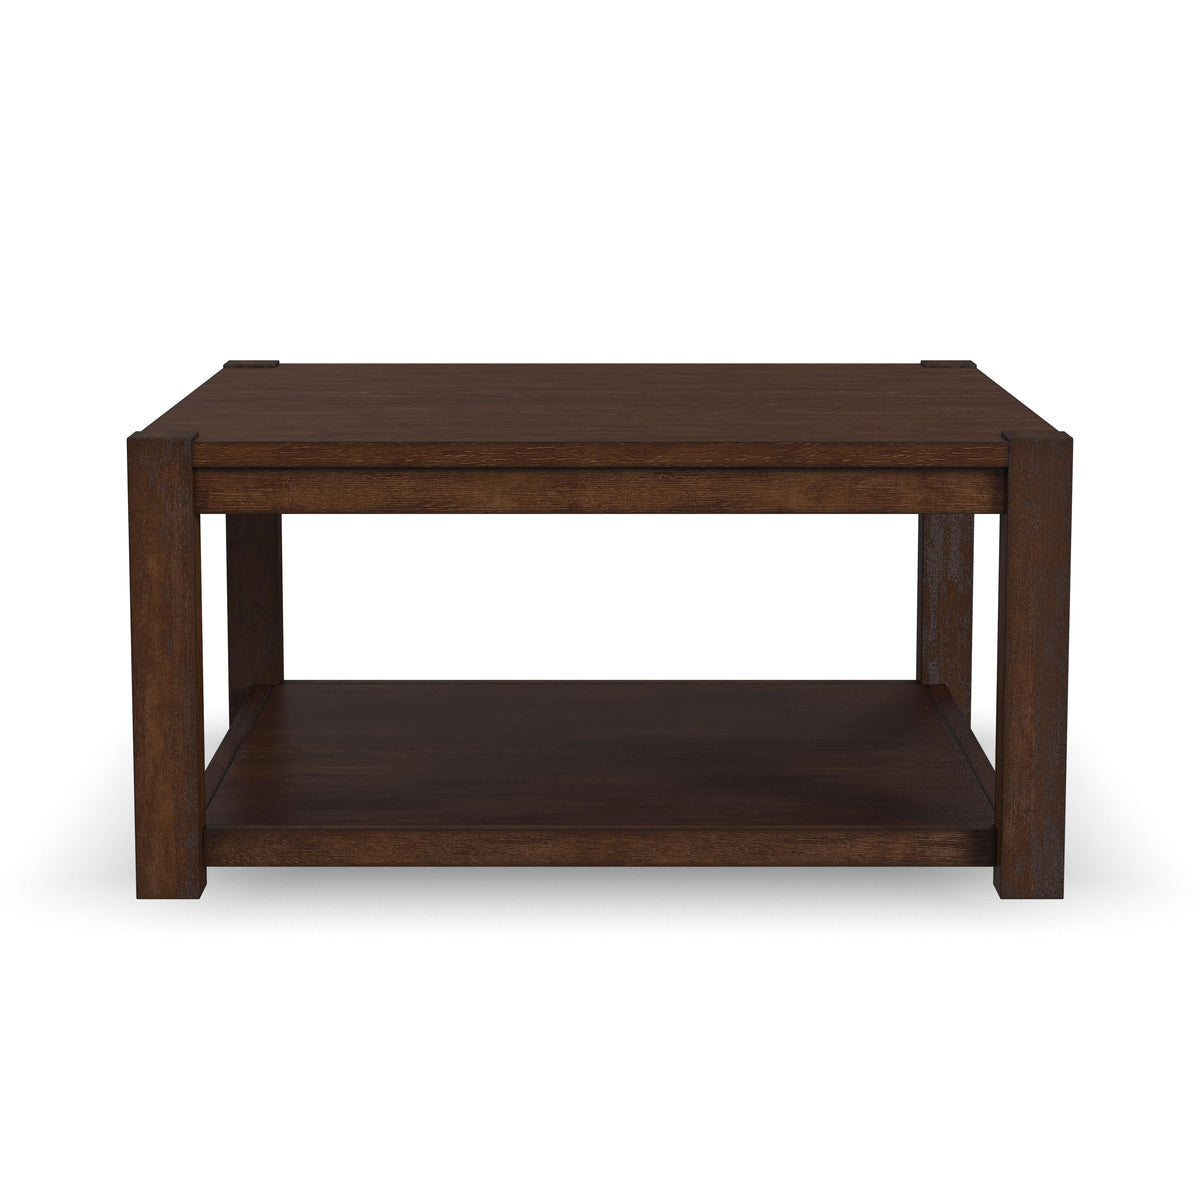 Boulder Square Coffee Table with Casters